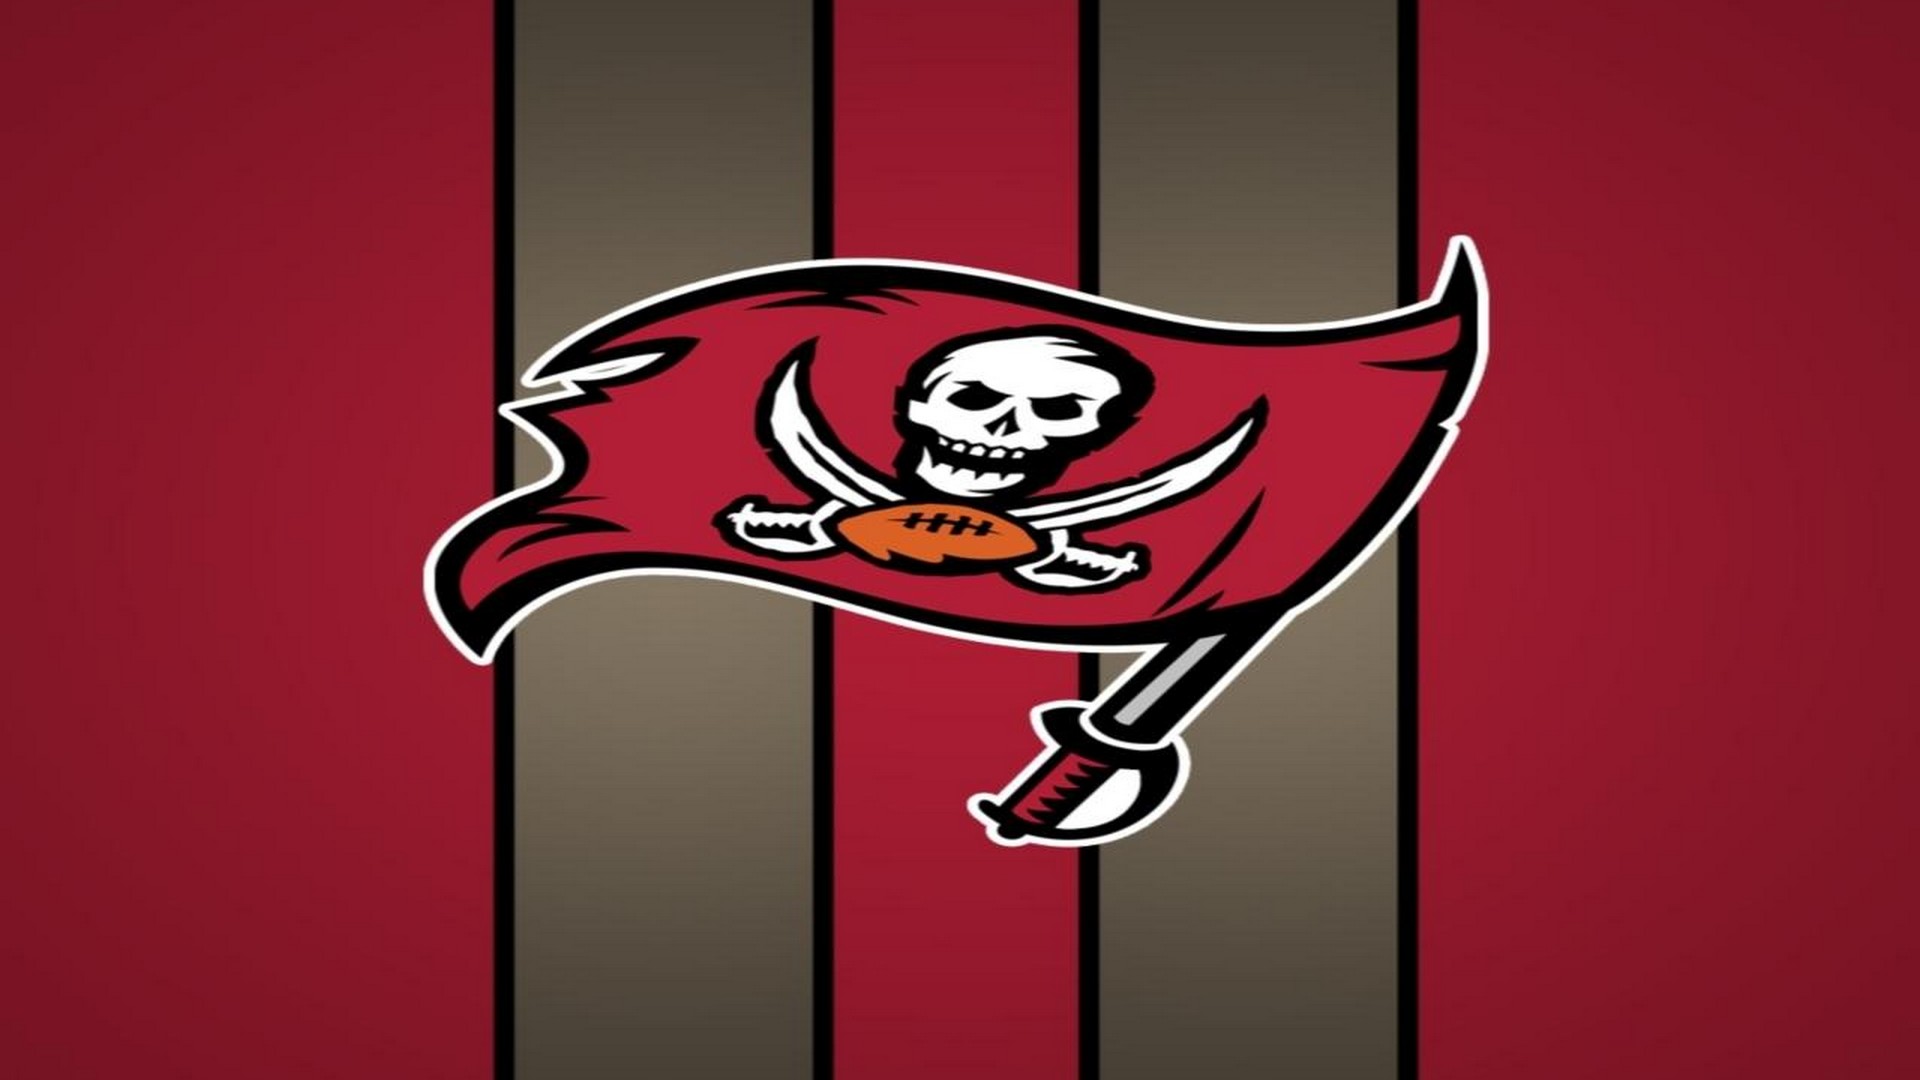 Tampa Bay Buccaneers Wallpaper With high-resolution 1920X1080 pixel. You can use this wallpaper for your Mac or Windows Desktop Background, iPhone, Android or Tablet and another Smartphone device